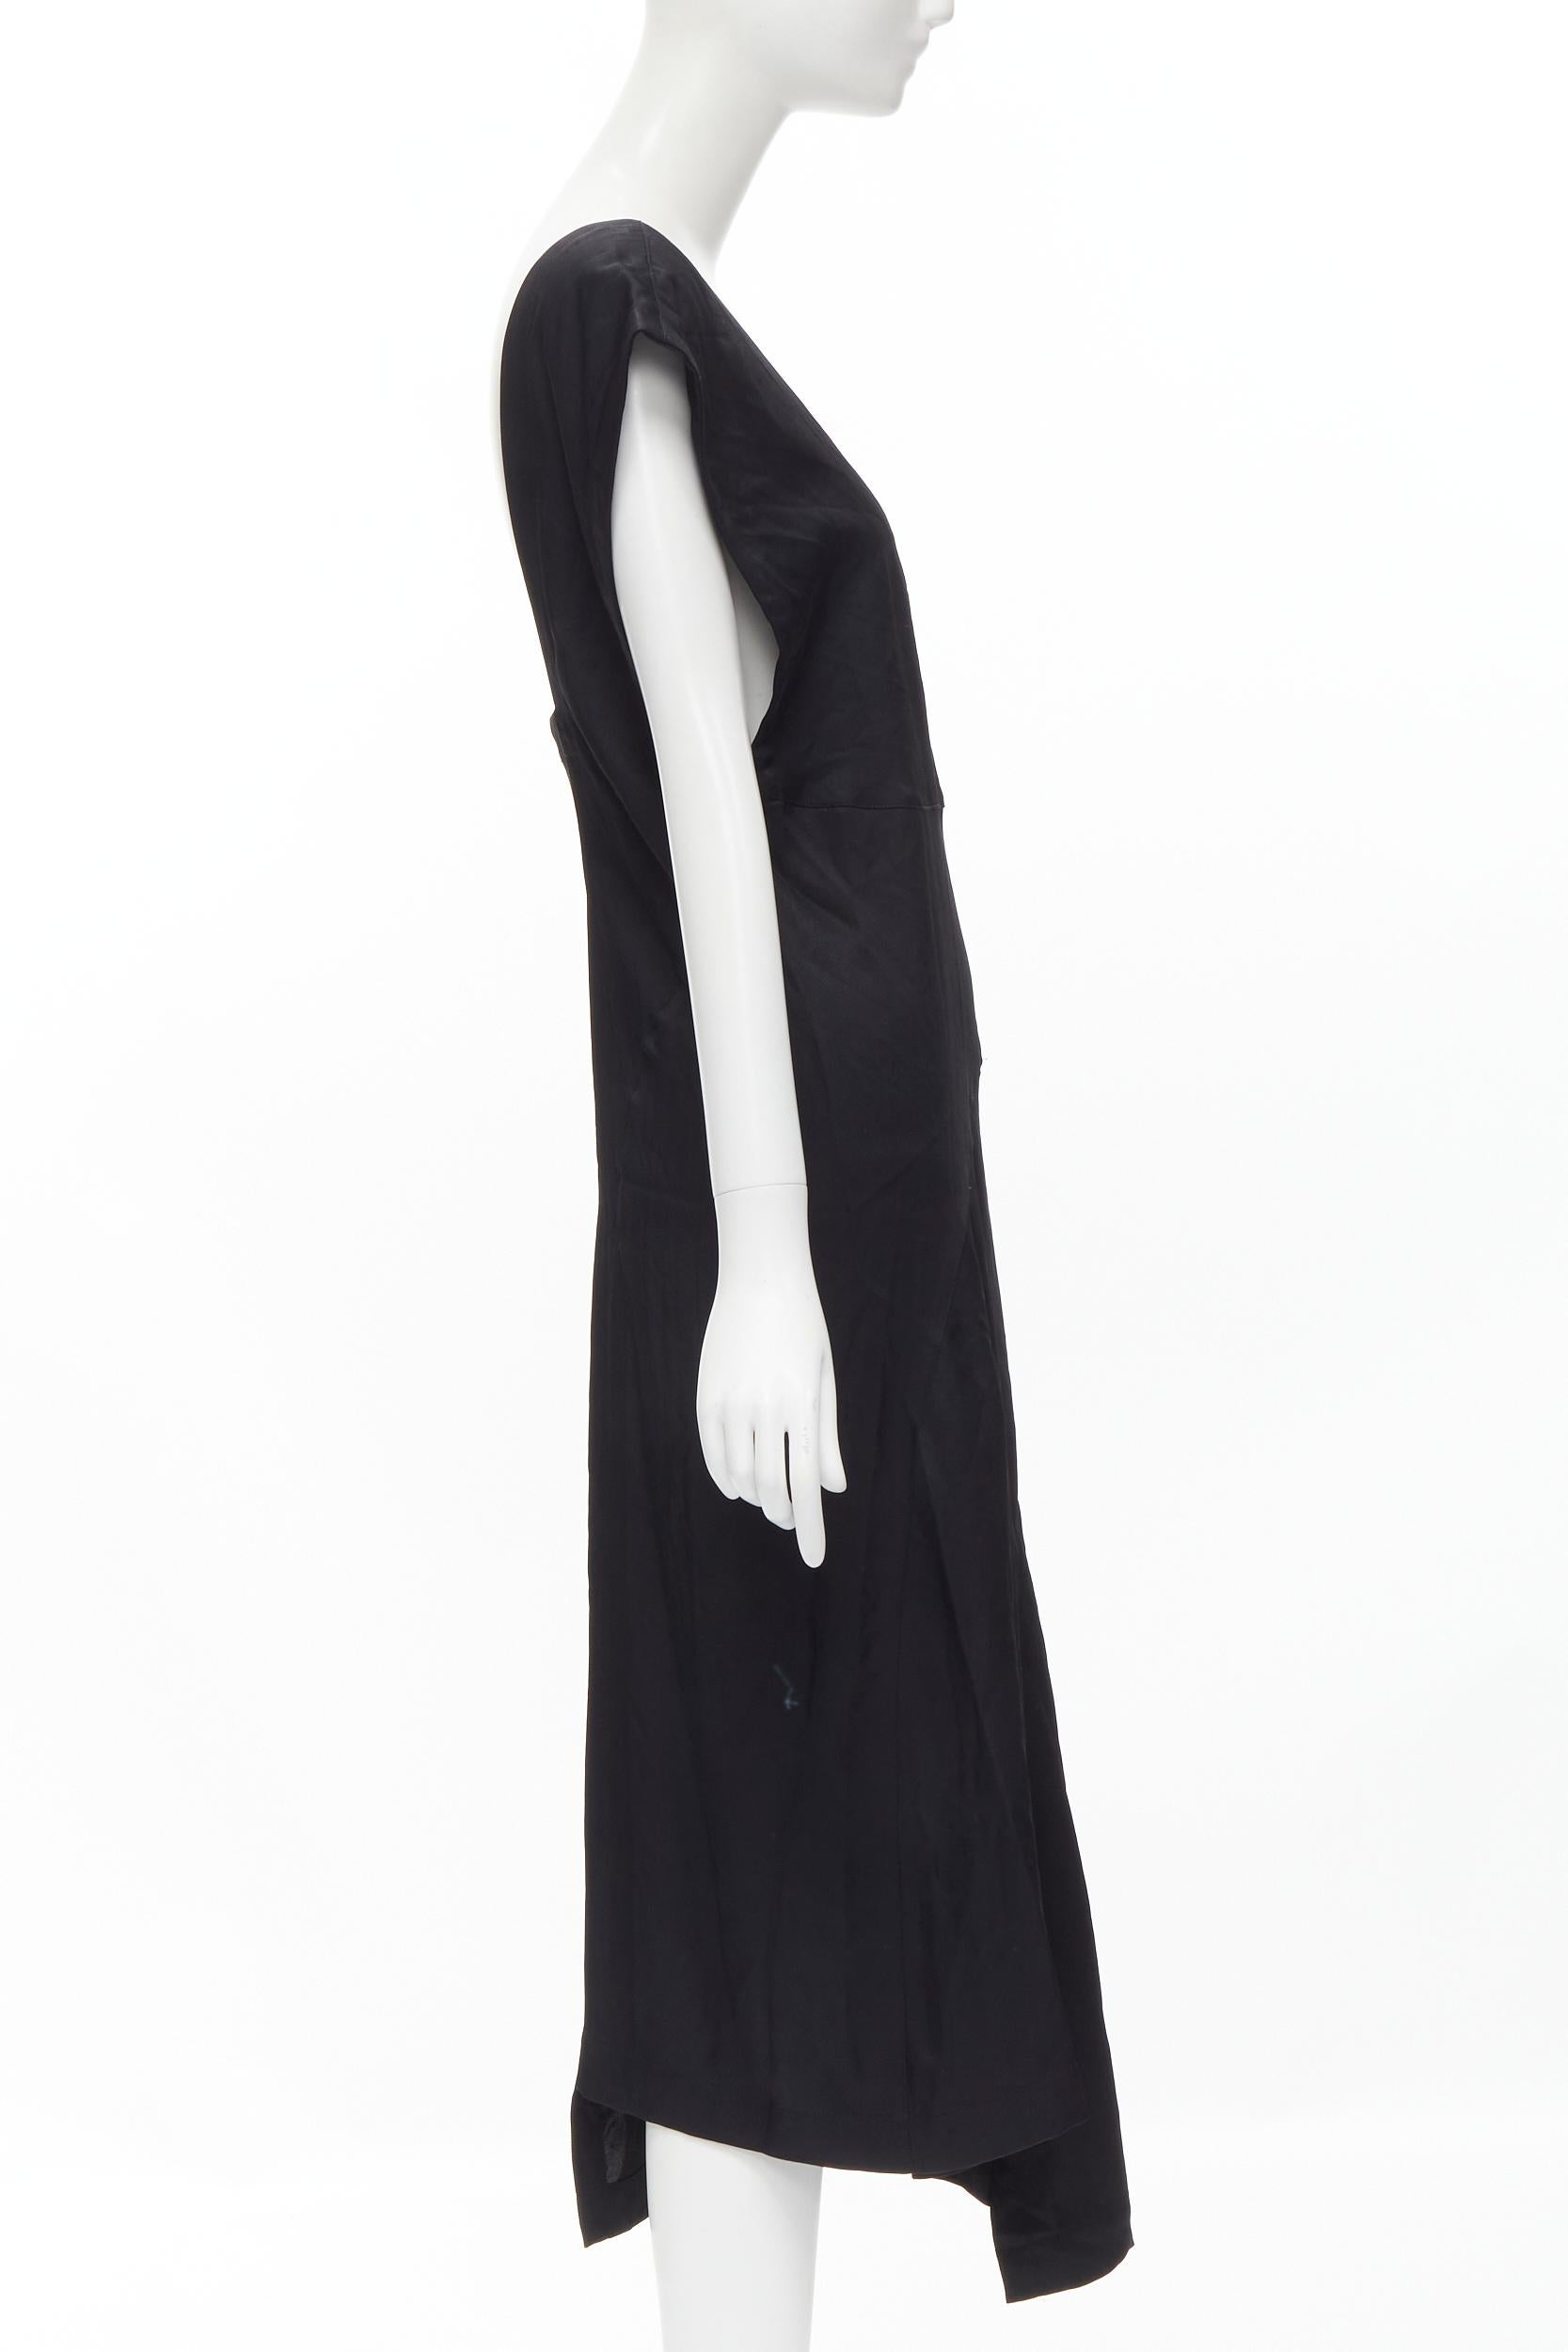 COMME DES GARCONS Vintage 1980s square neck oversized bias cut dress In Excellent Condition For Sale In Hong Kong, NT